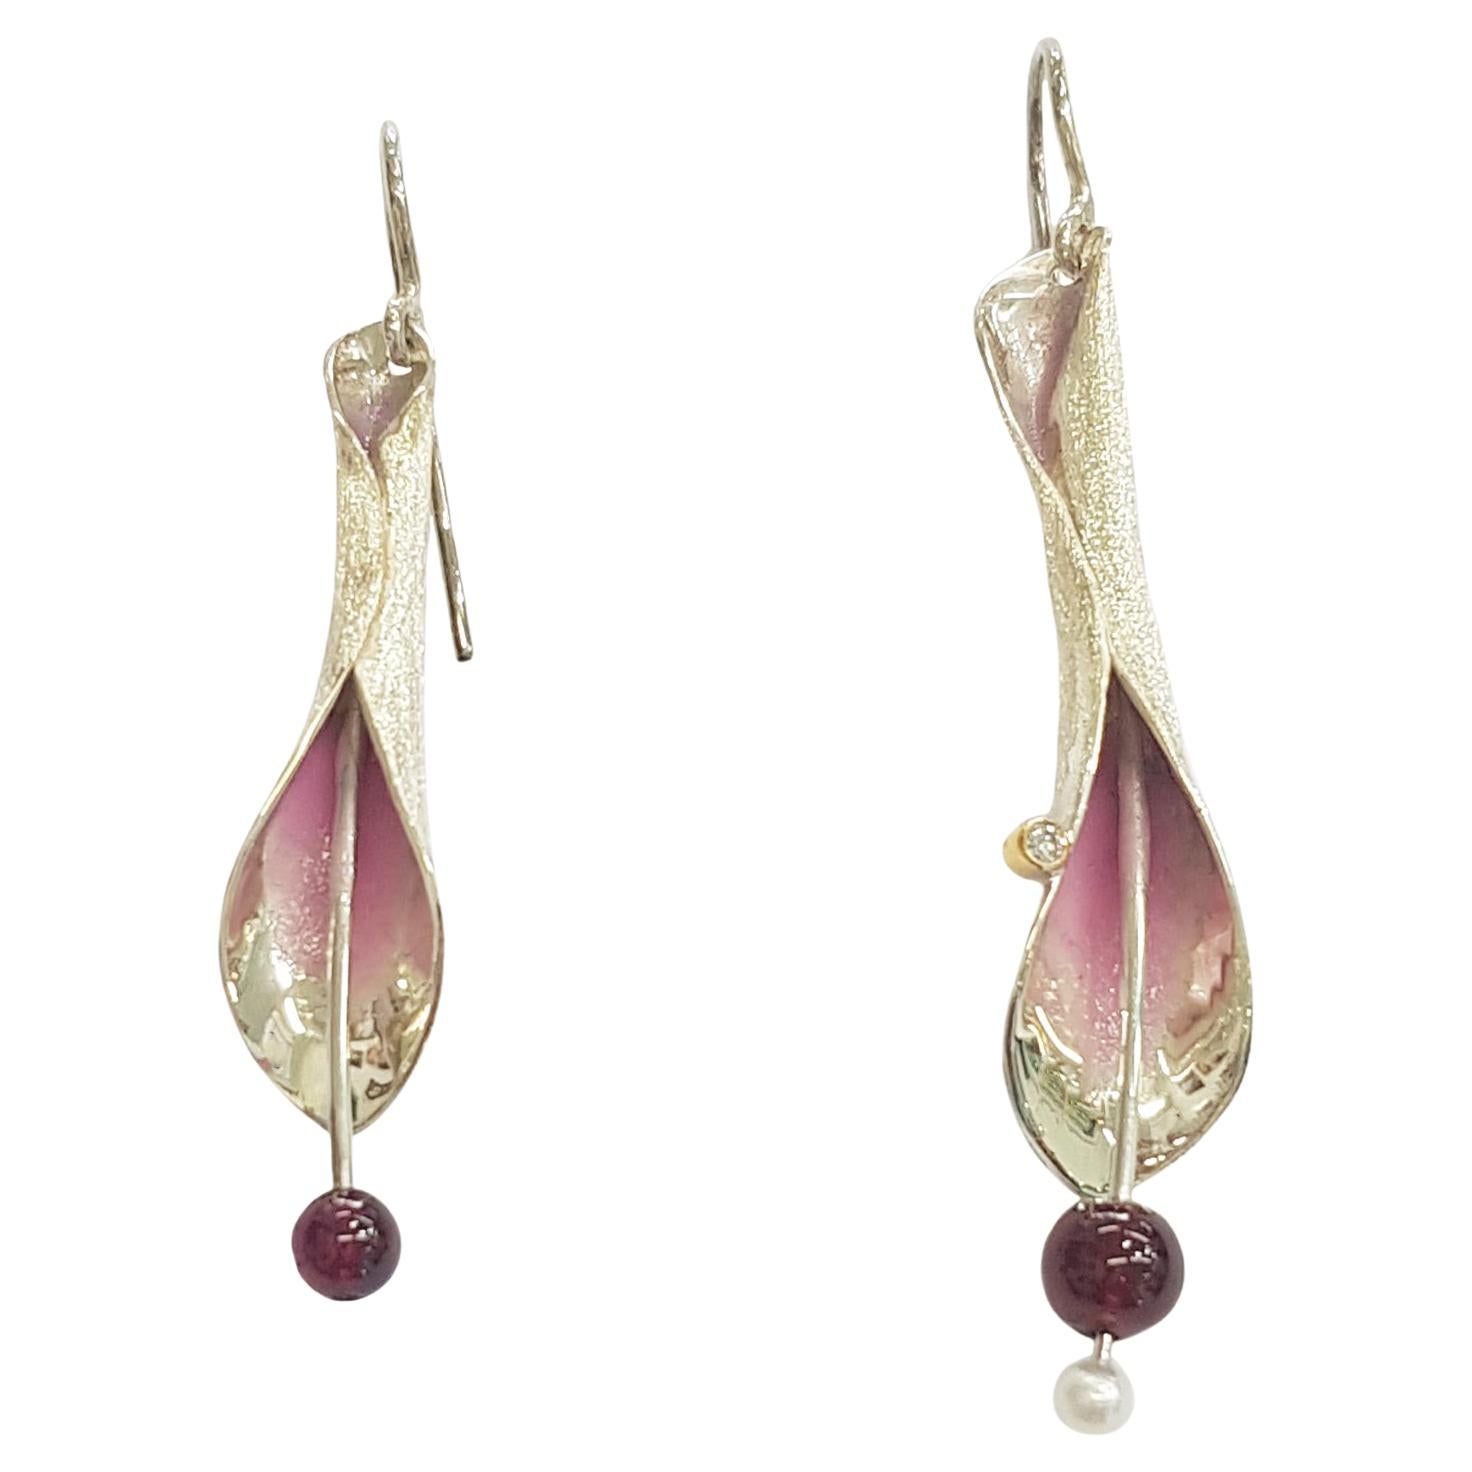 Paul Amey "Pink Lilly" Offset Sterling Silver Earrings